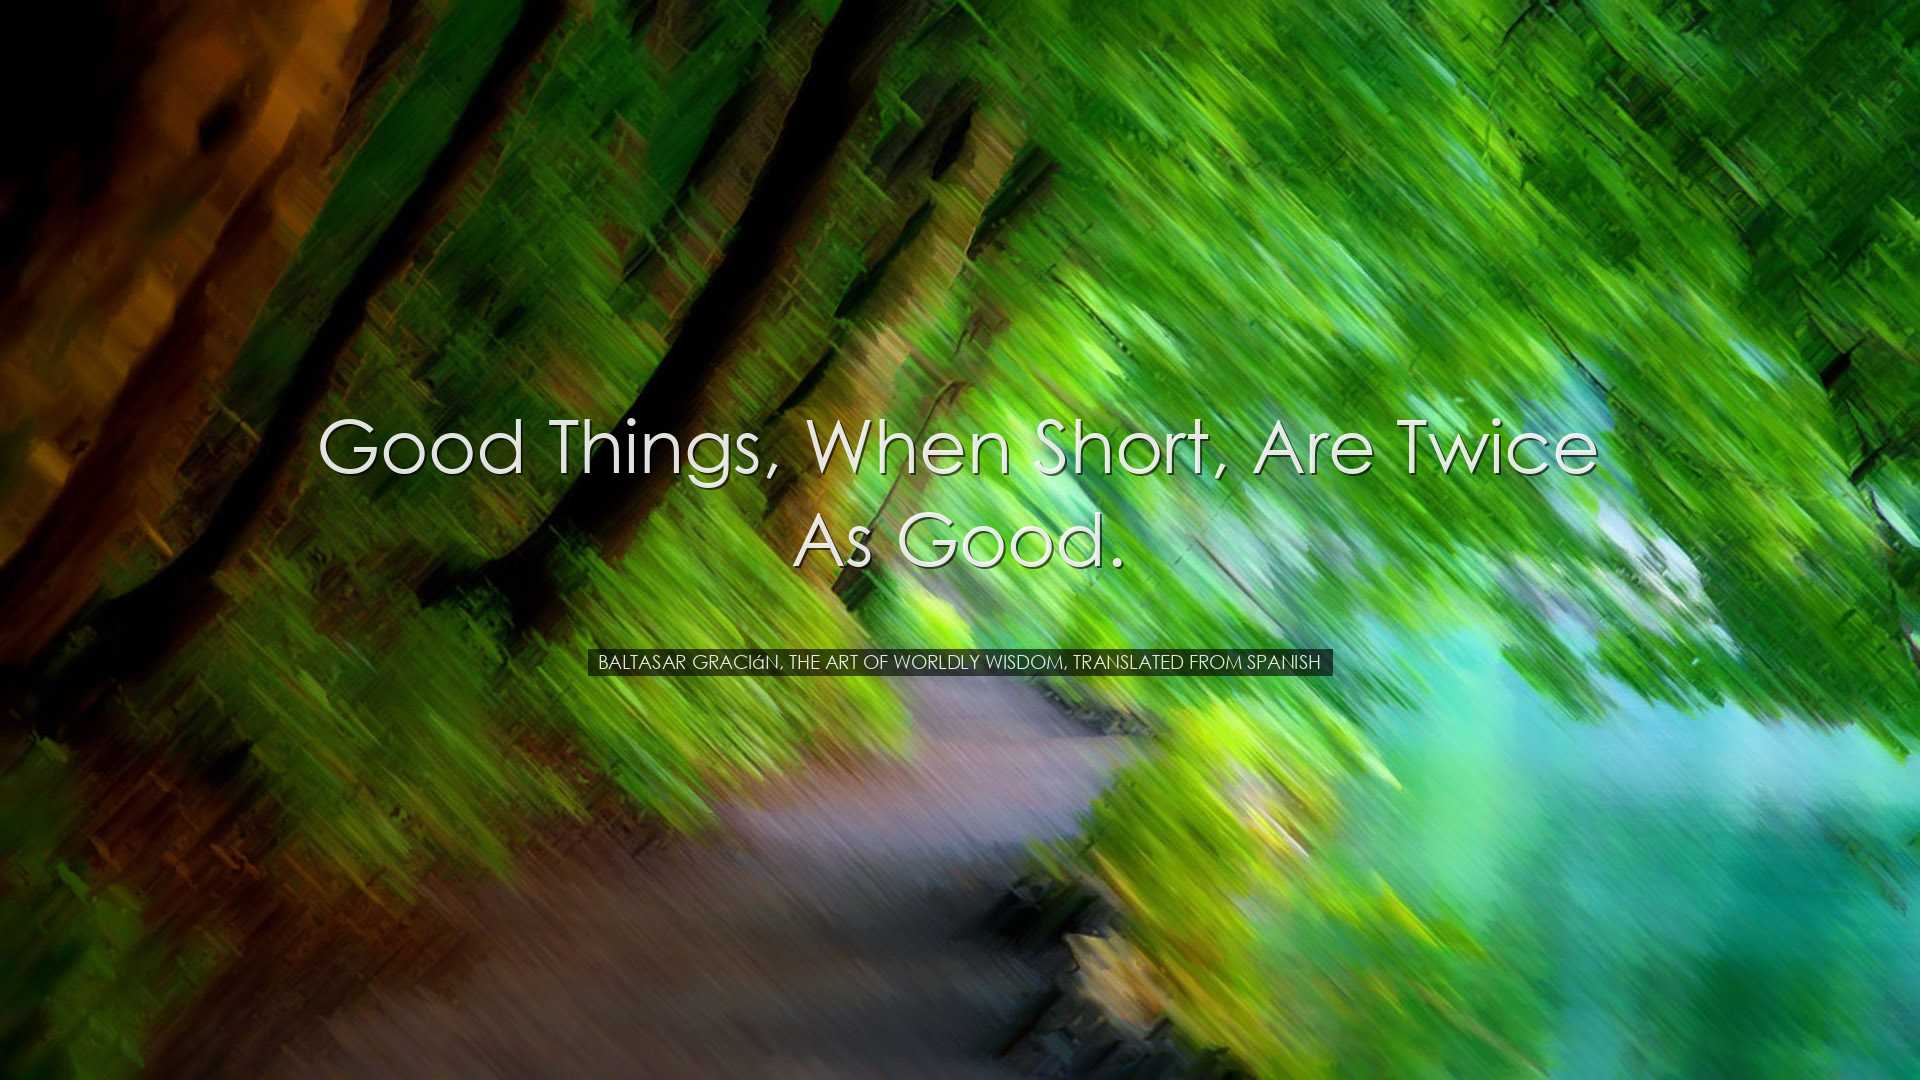 Good things, when short, are twice as good. - Baltasar GraciÃ¡n,